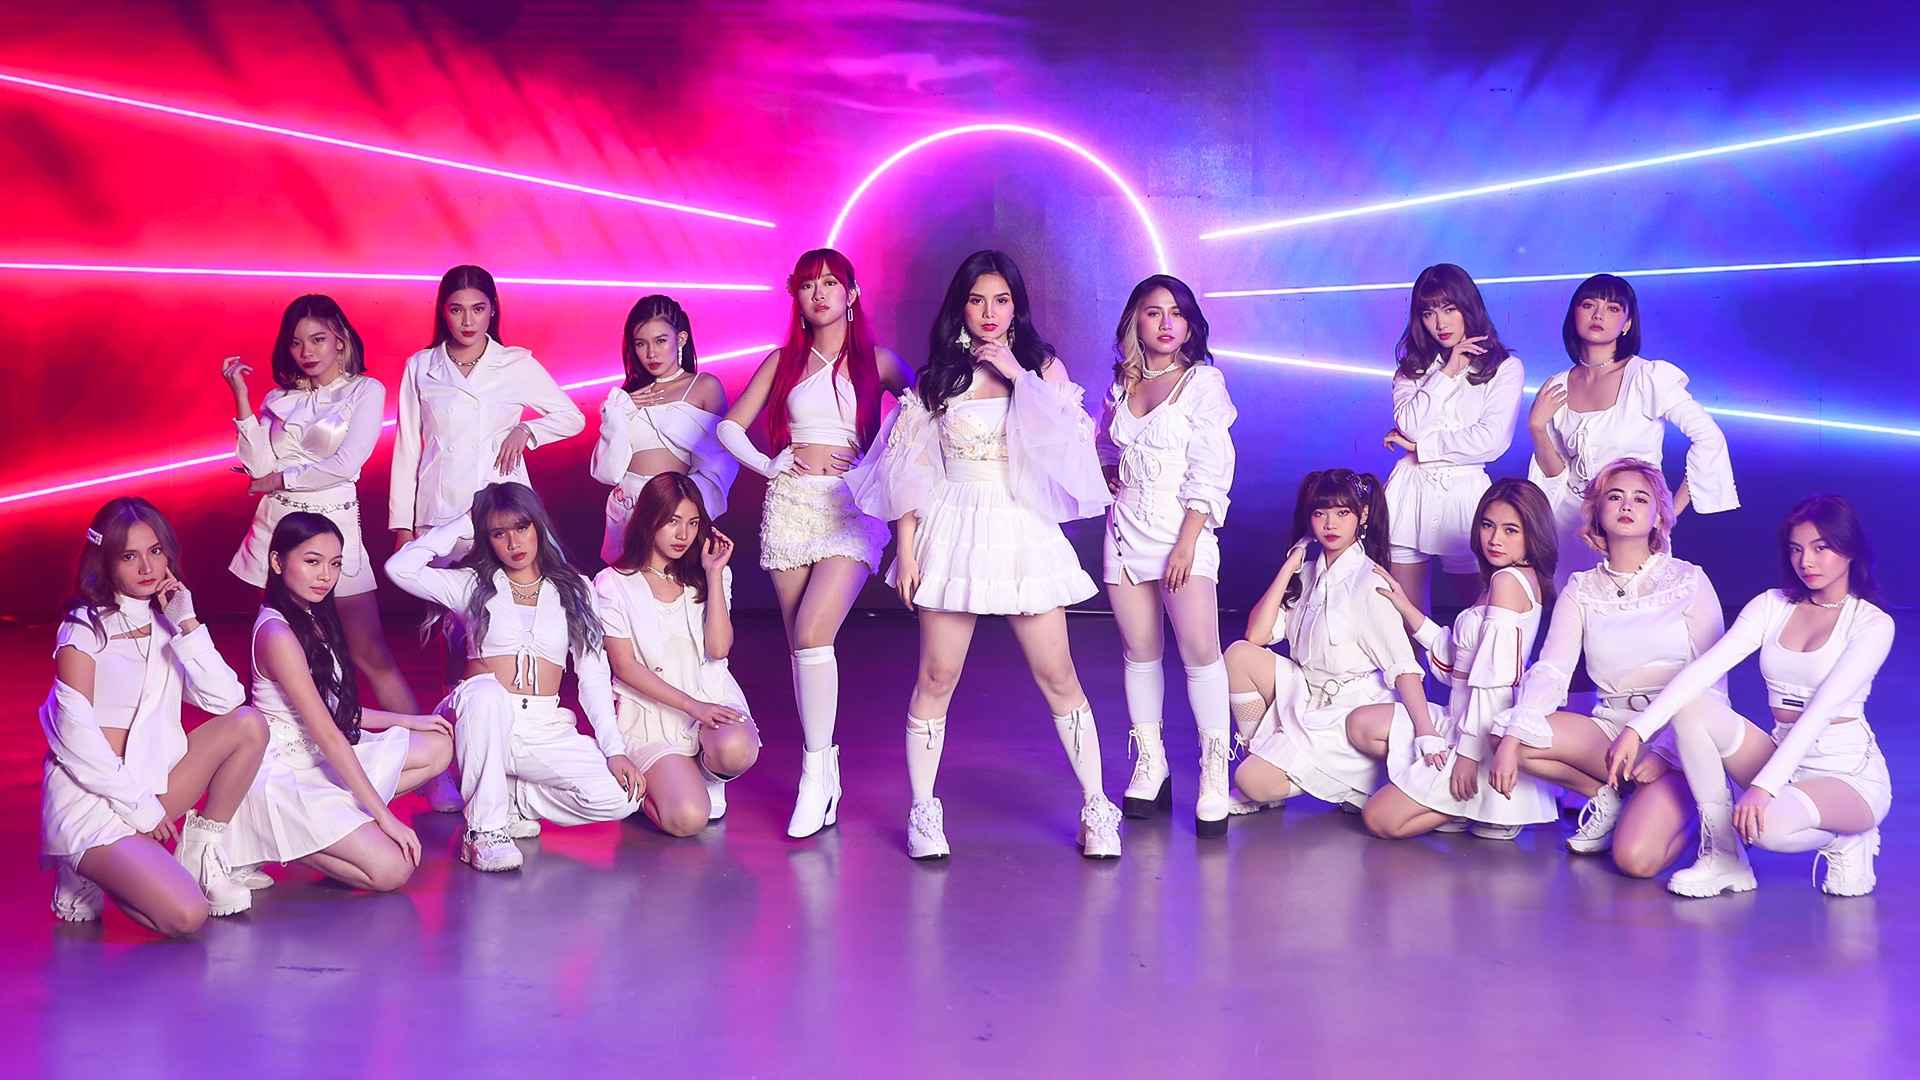 MNL48 makes a long-awaited comeback with 7th single “No Way Man”